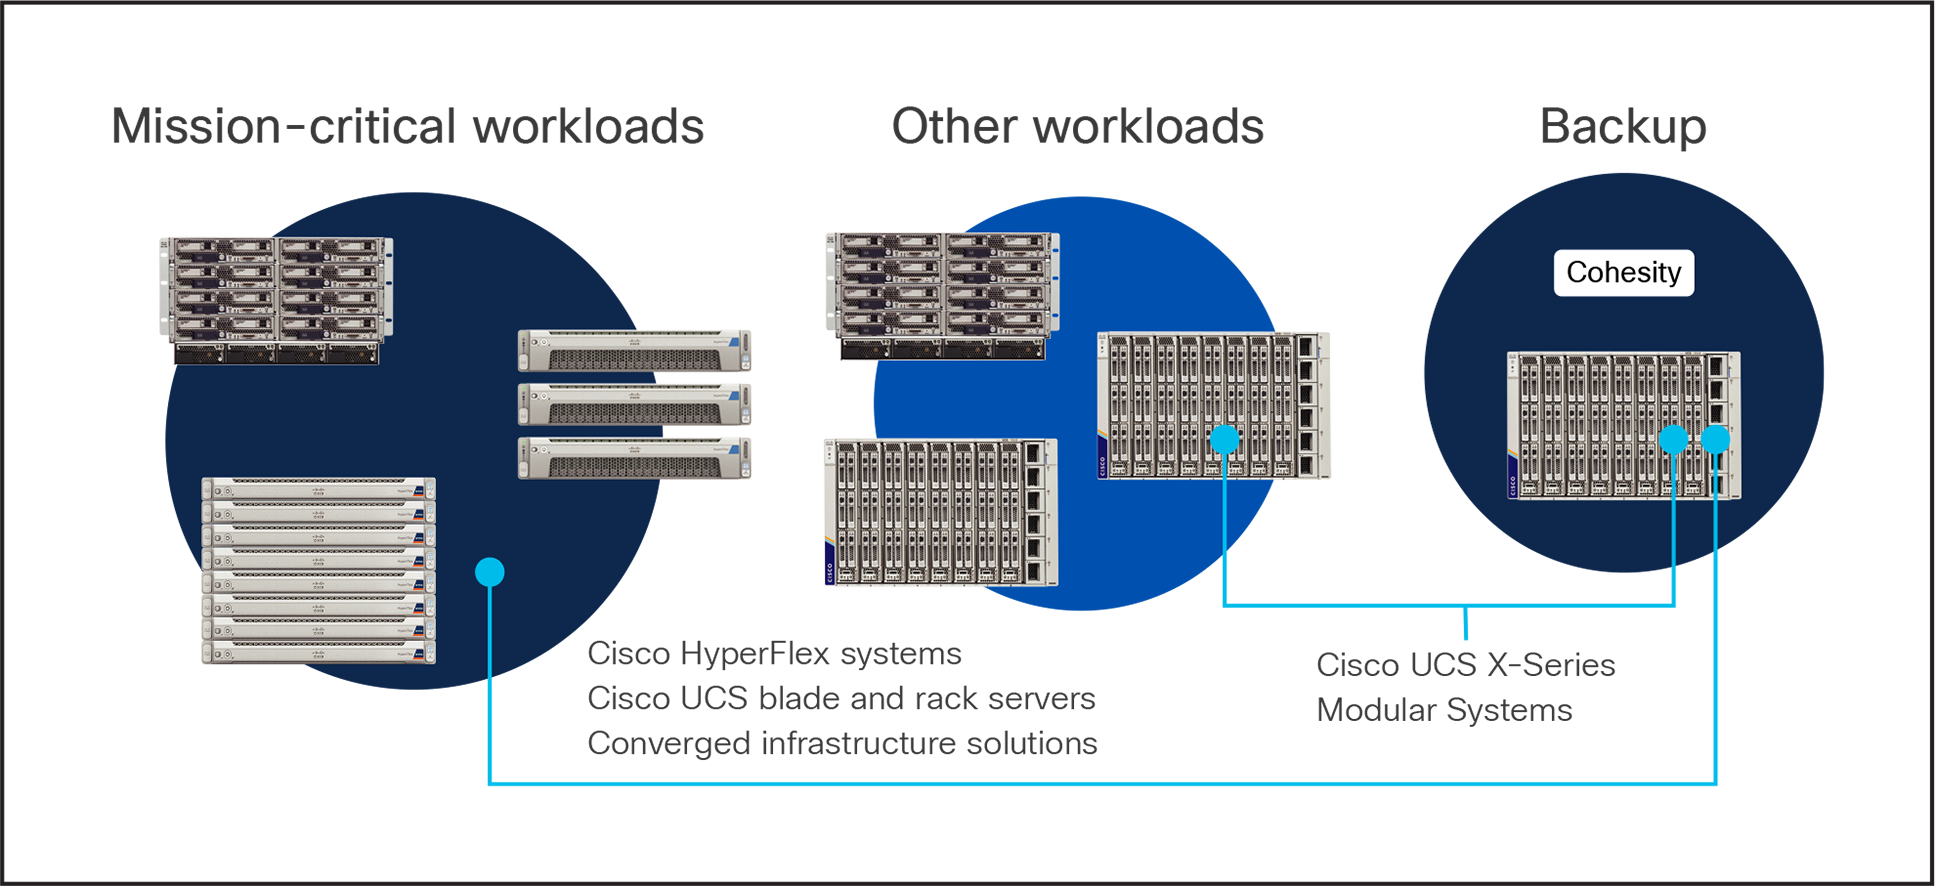 Cisco UCS X-Series as part of the Cohesity ecosystem